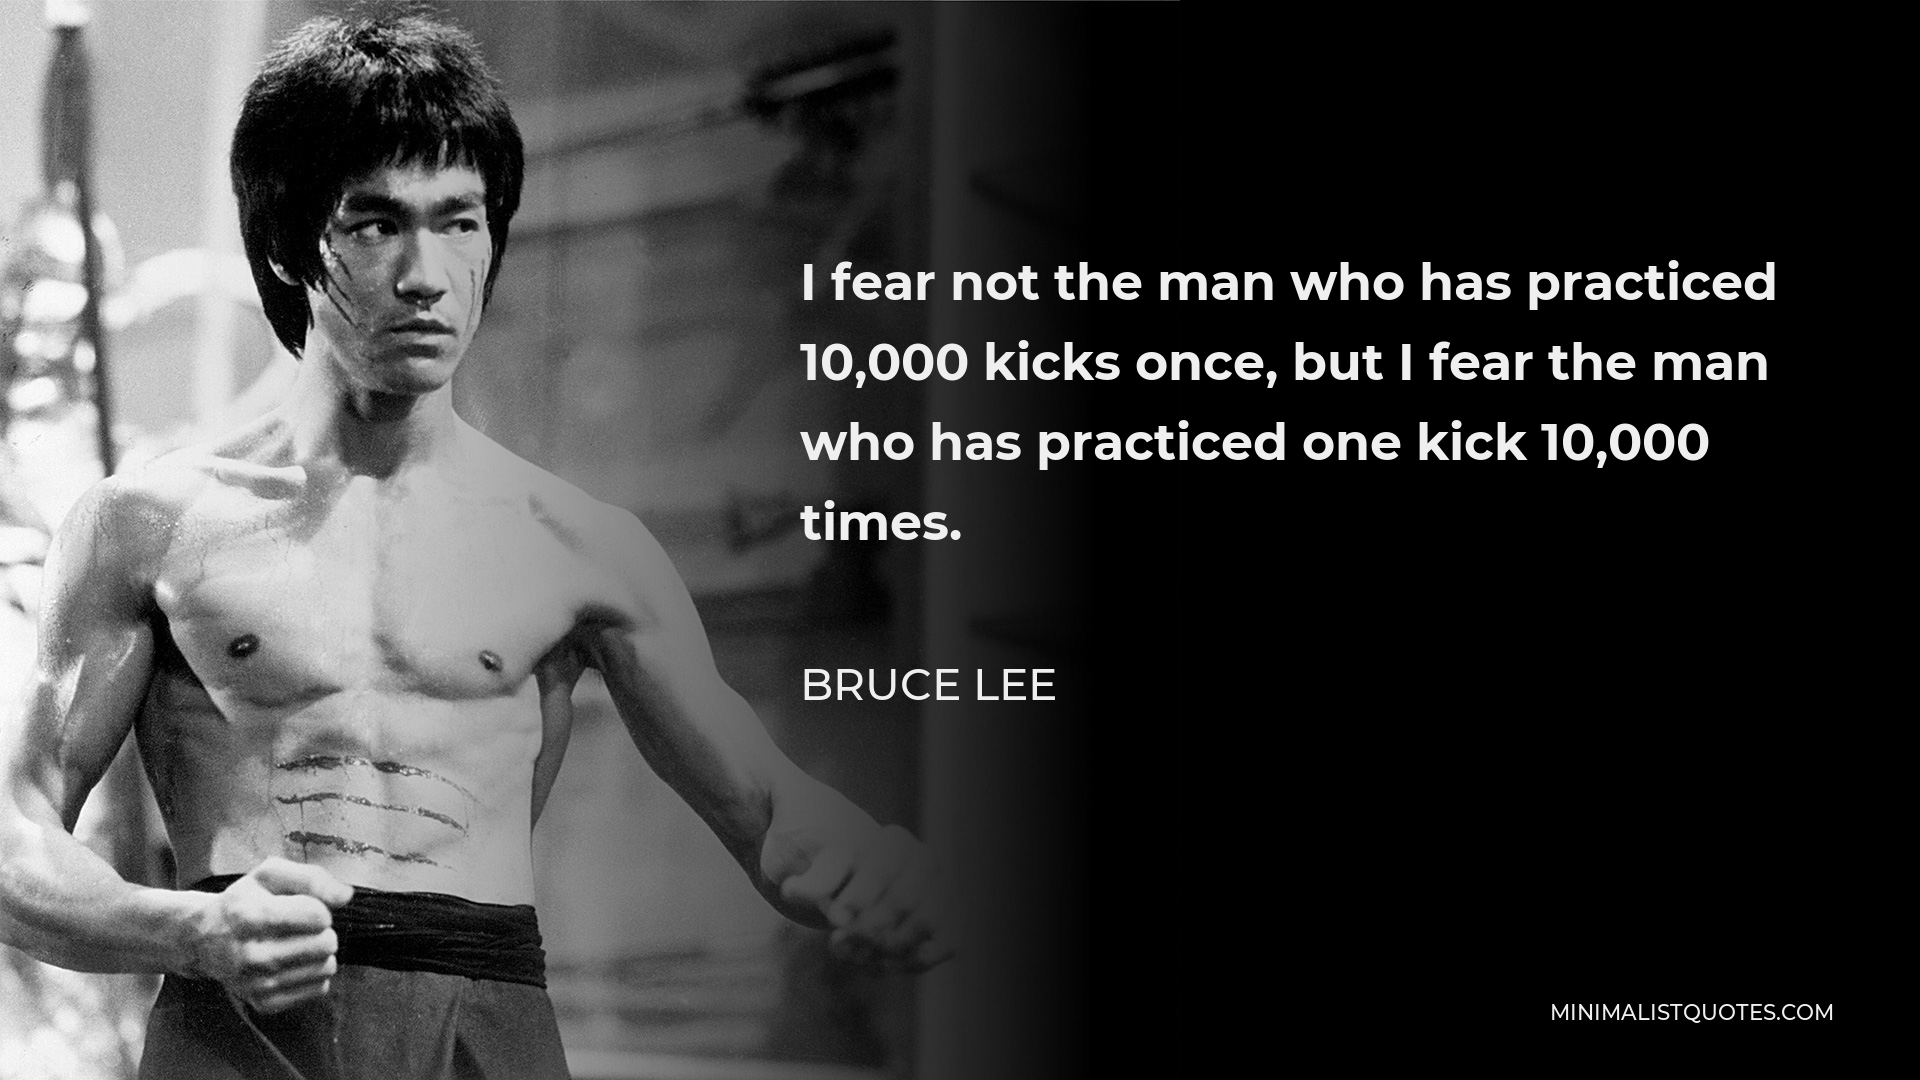 Bruce Lee Quote - I fear not the man who has practiced 10,000 kicks once, but I fear the man who has practiced one kick 10,000 times.